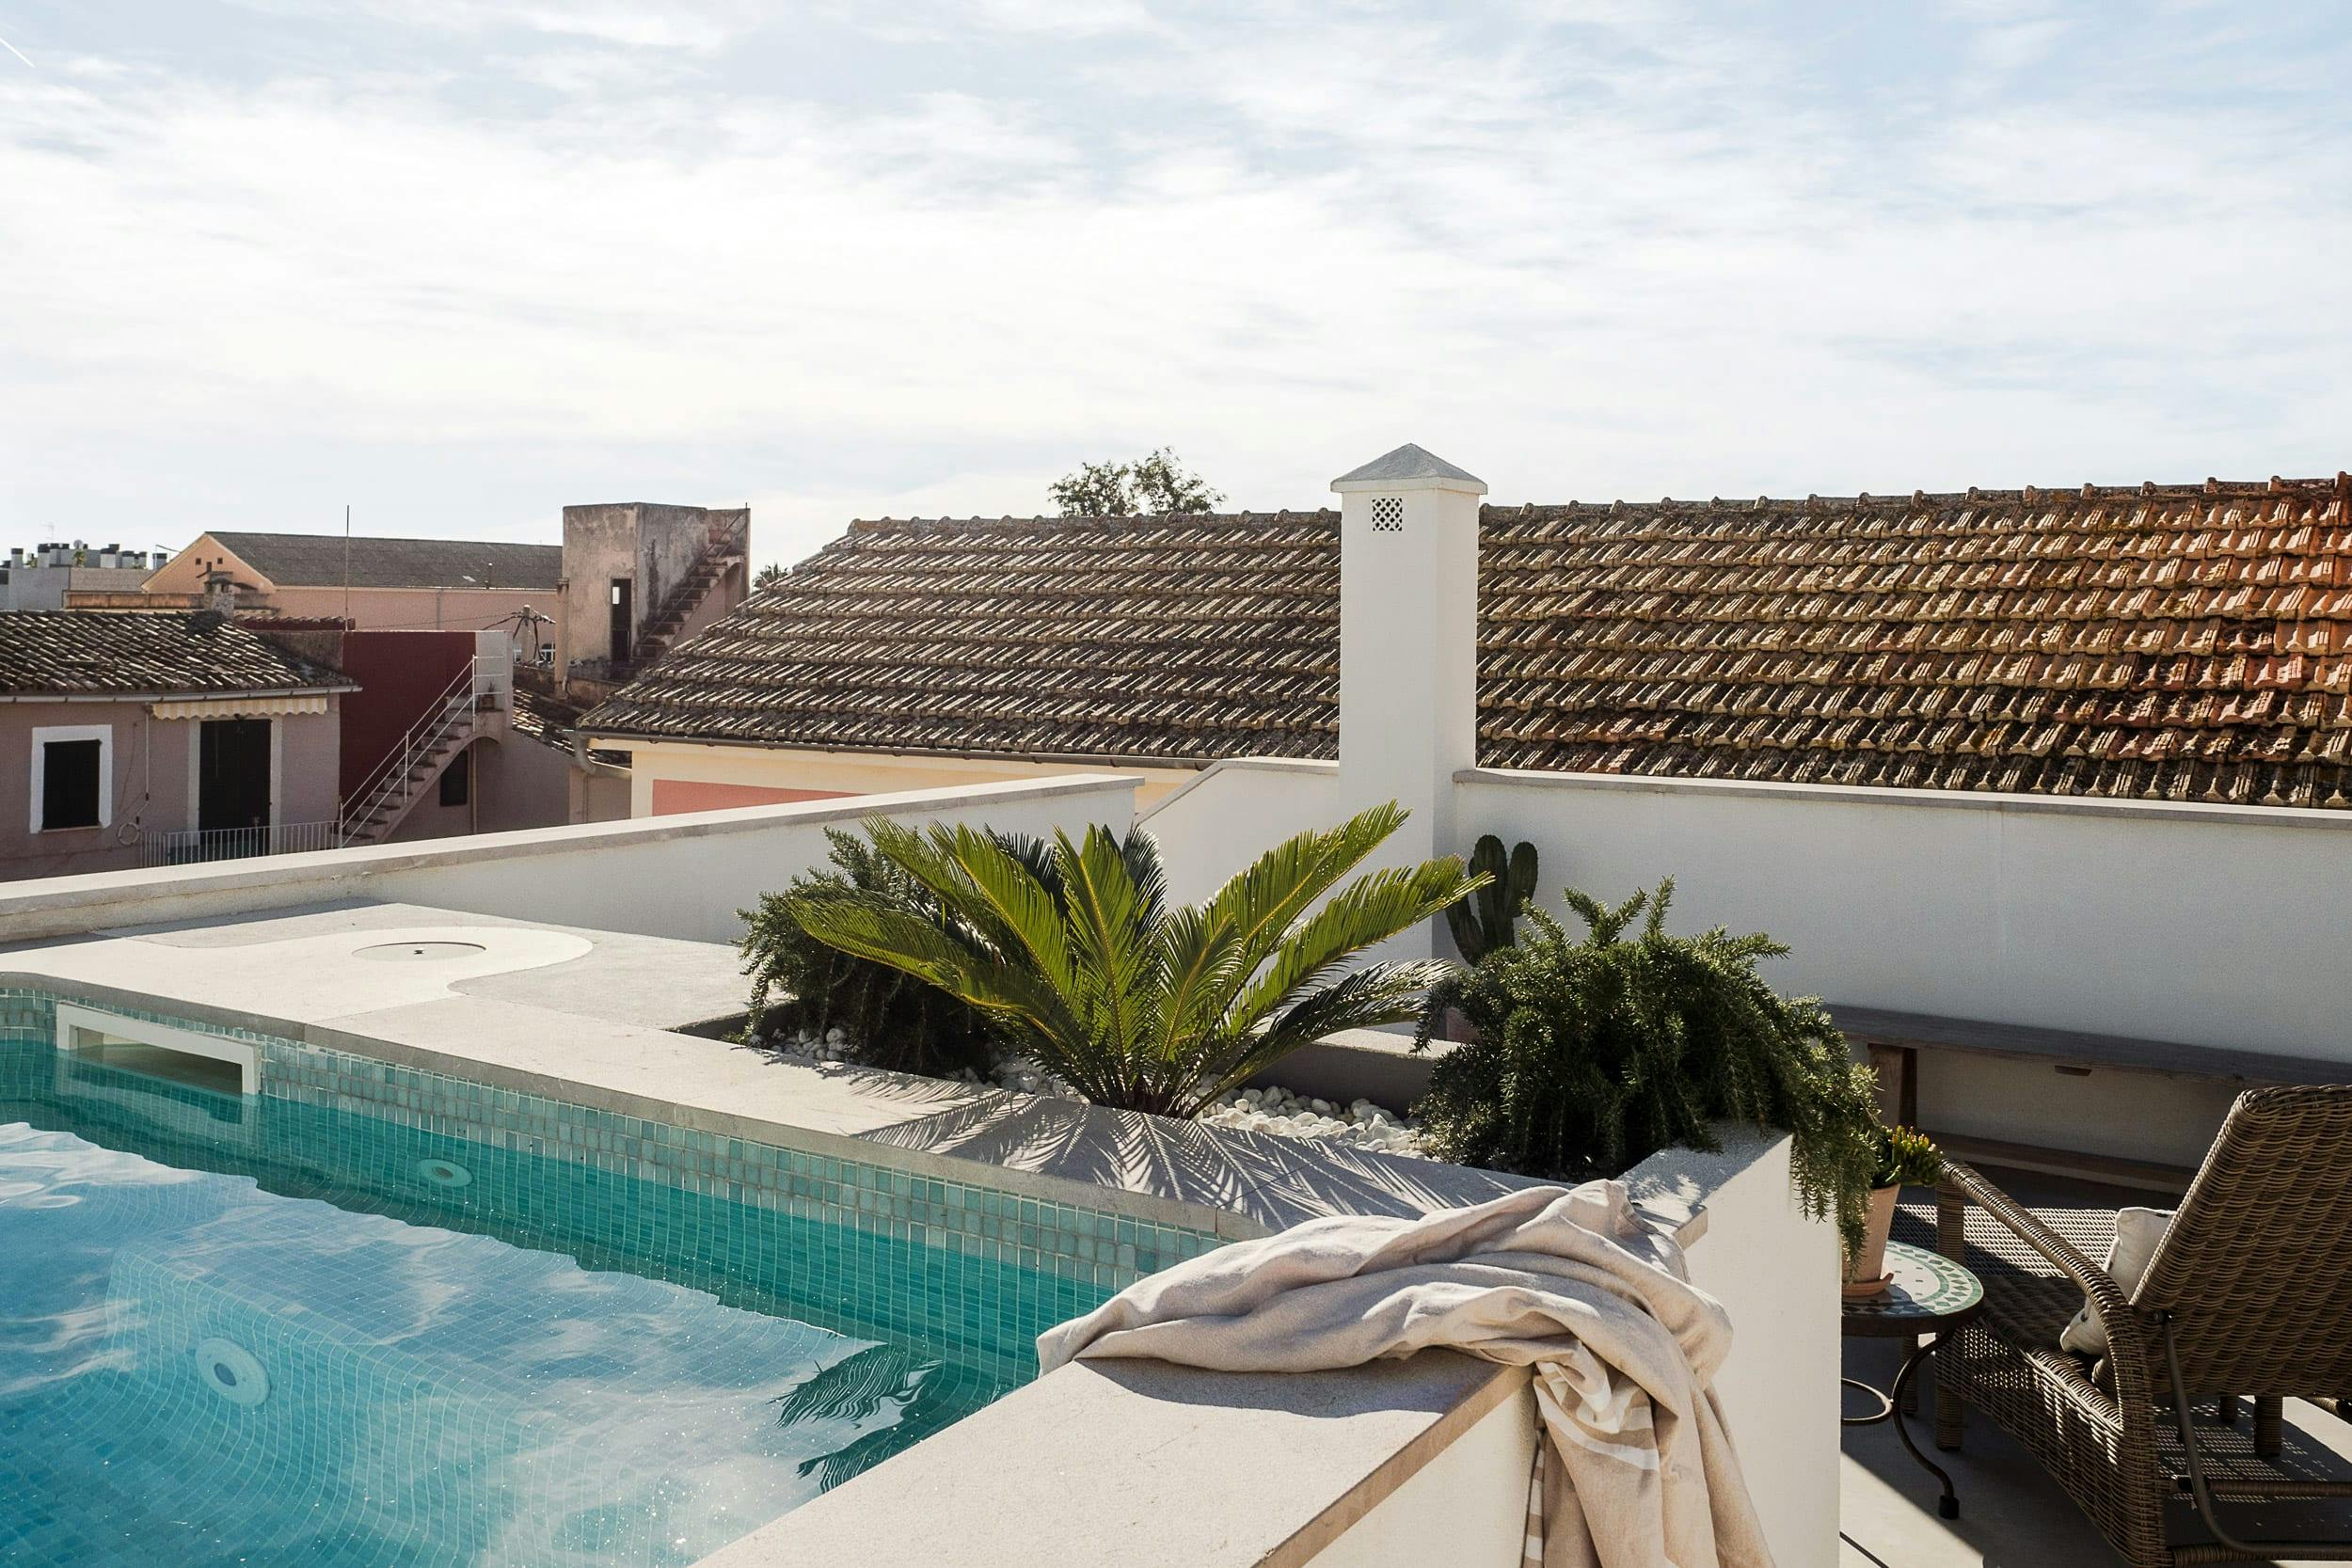 The image features a large swimming pool with a white tile roof, surrounded by a patio area with a lounge chair and a table.